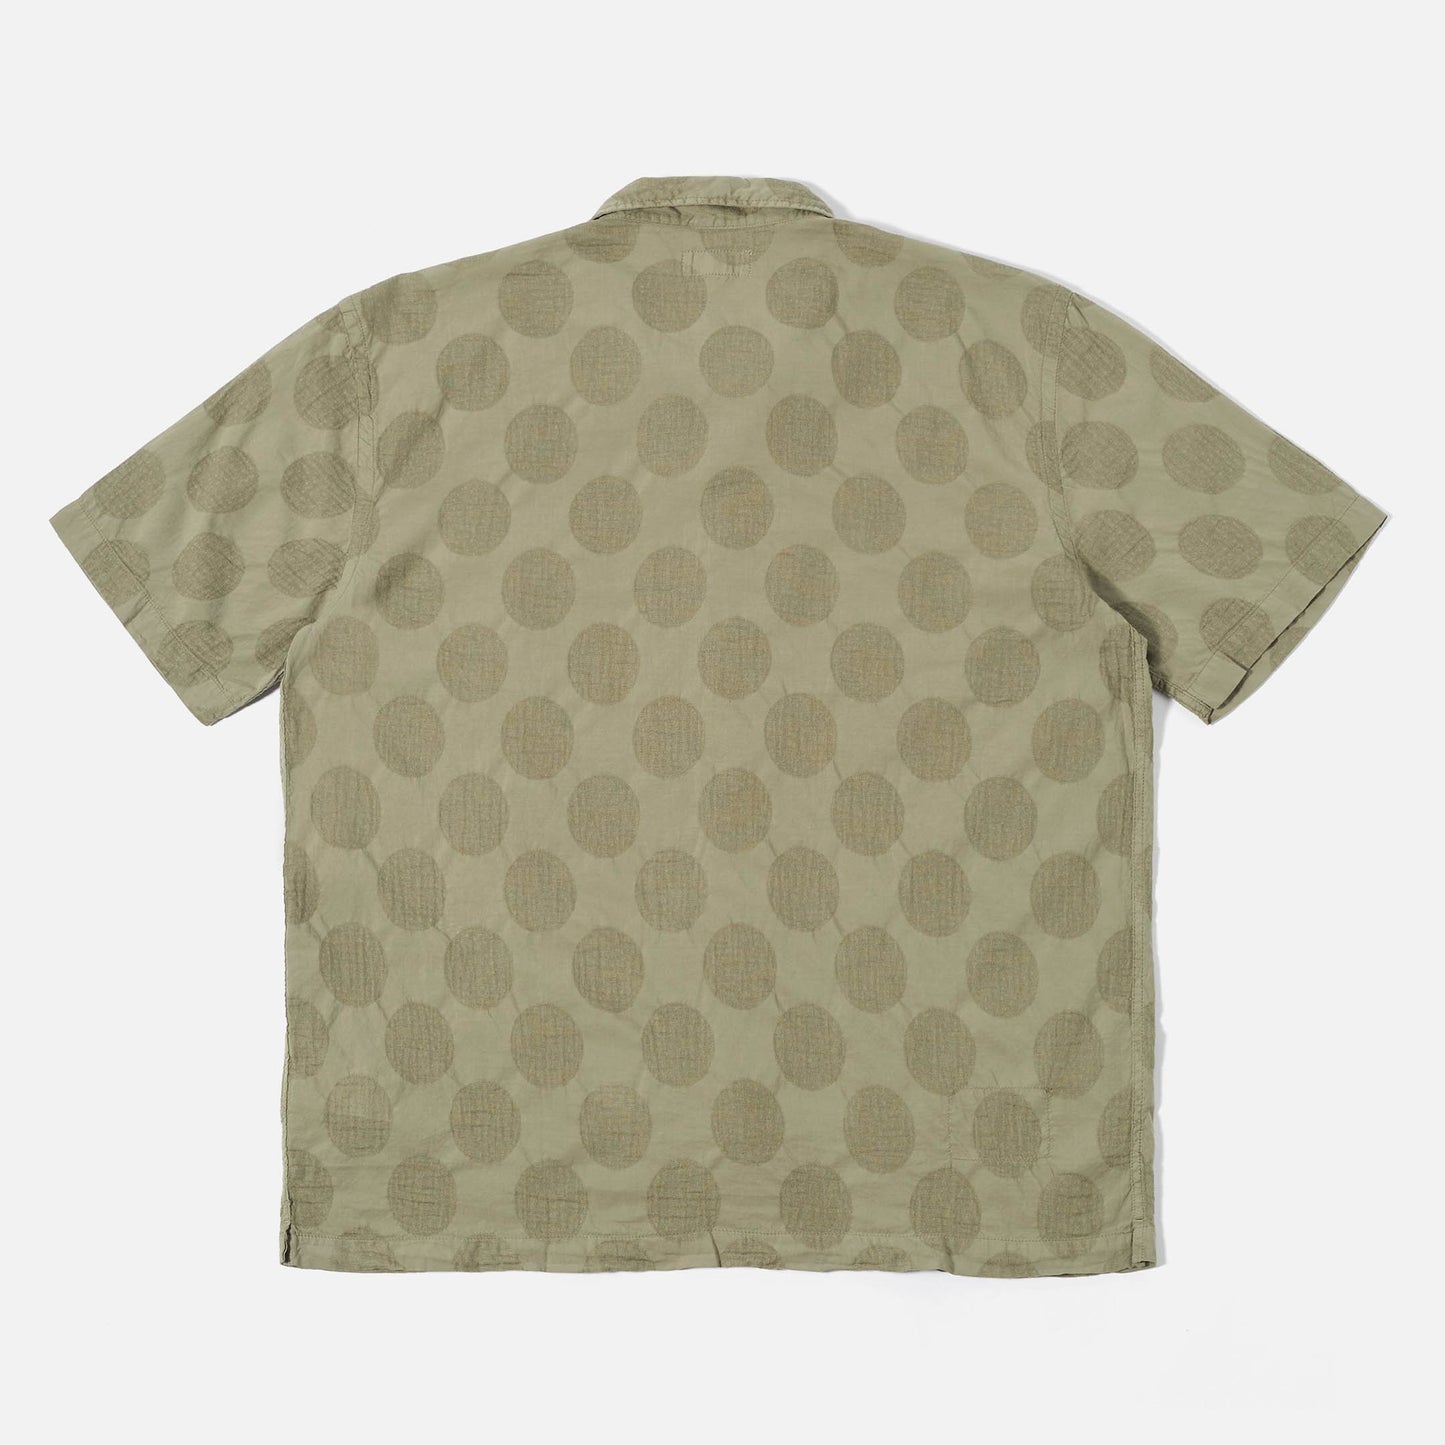 Road Shirt in Olive Dot Cotton